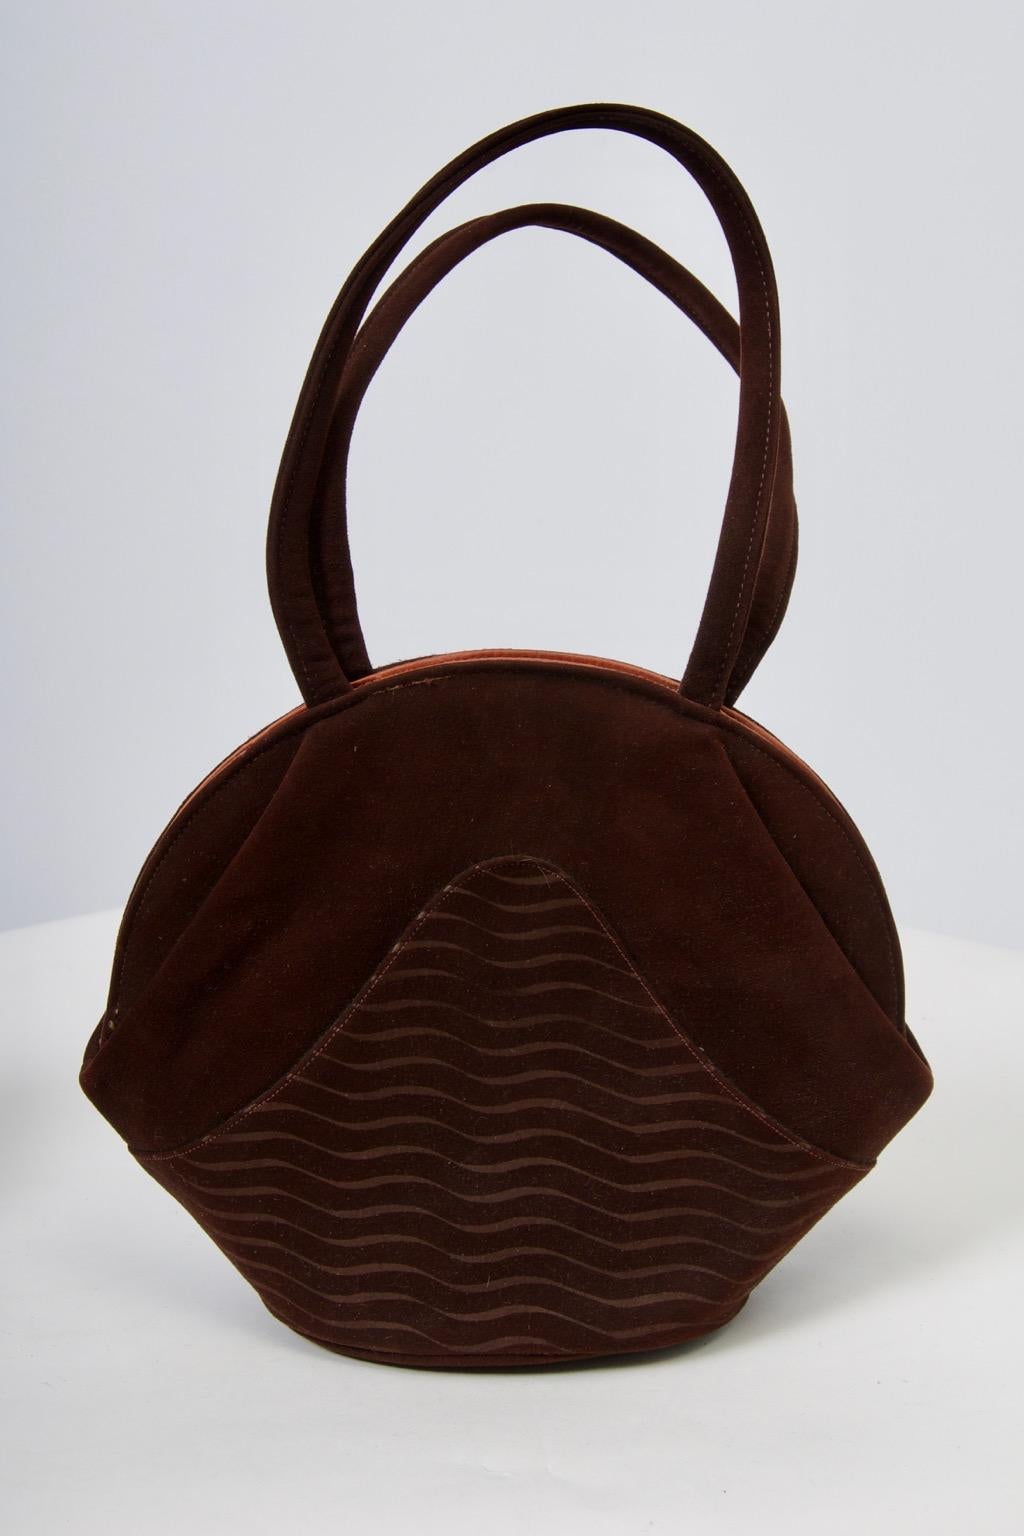 1950s brown suede handbag and matching slingback, open toe pumps in brown suede, both decorated with a carved wave pattern. The unusually shaped handbag sports a double handle and snaps open and closed to reveal a copper-colored satin lining with